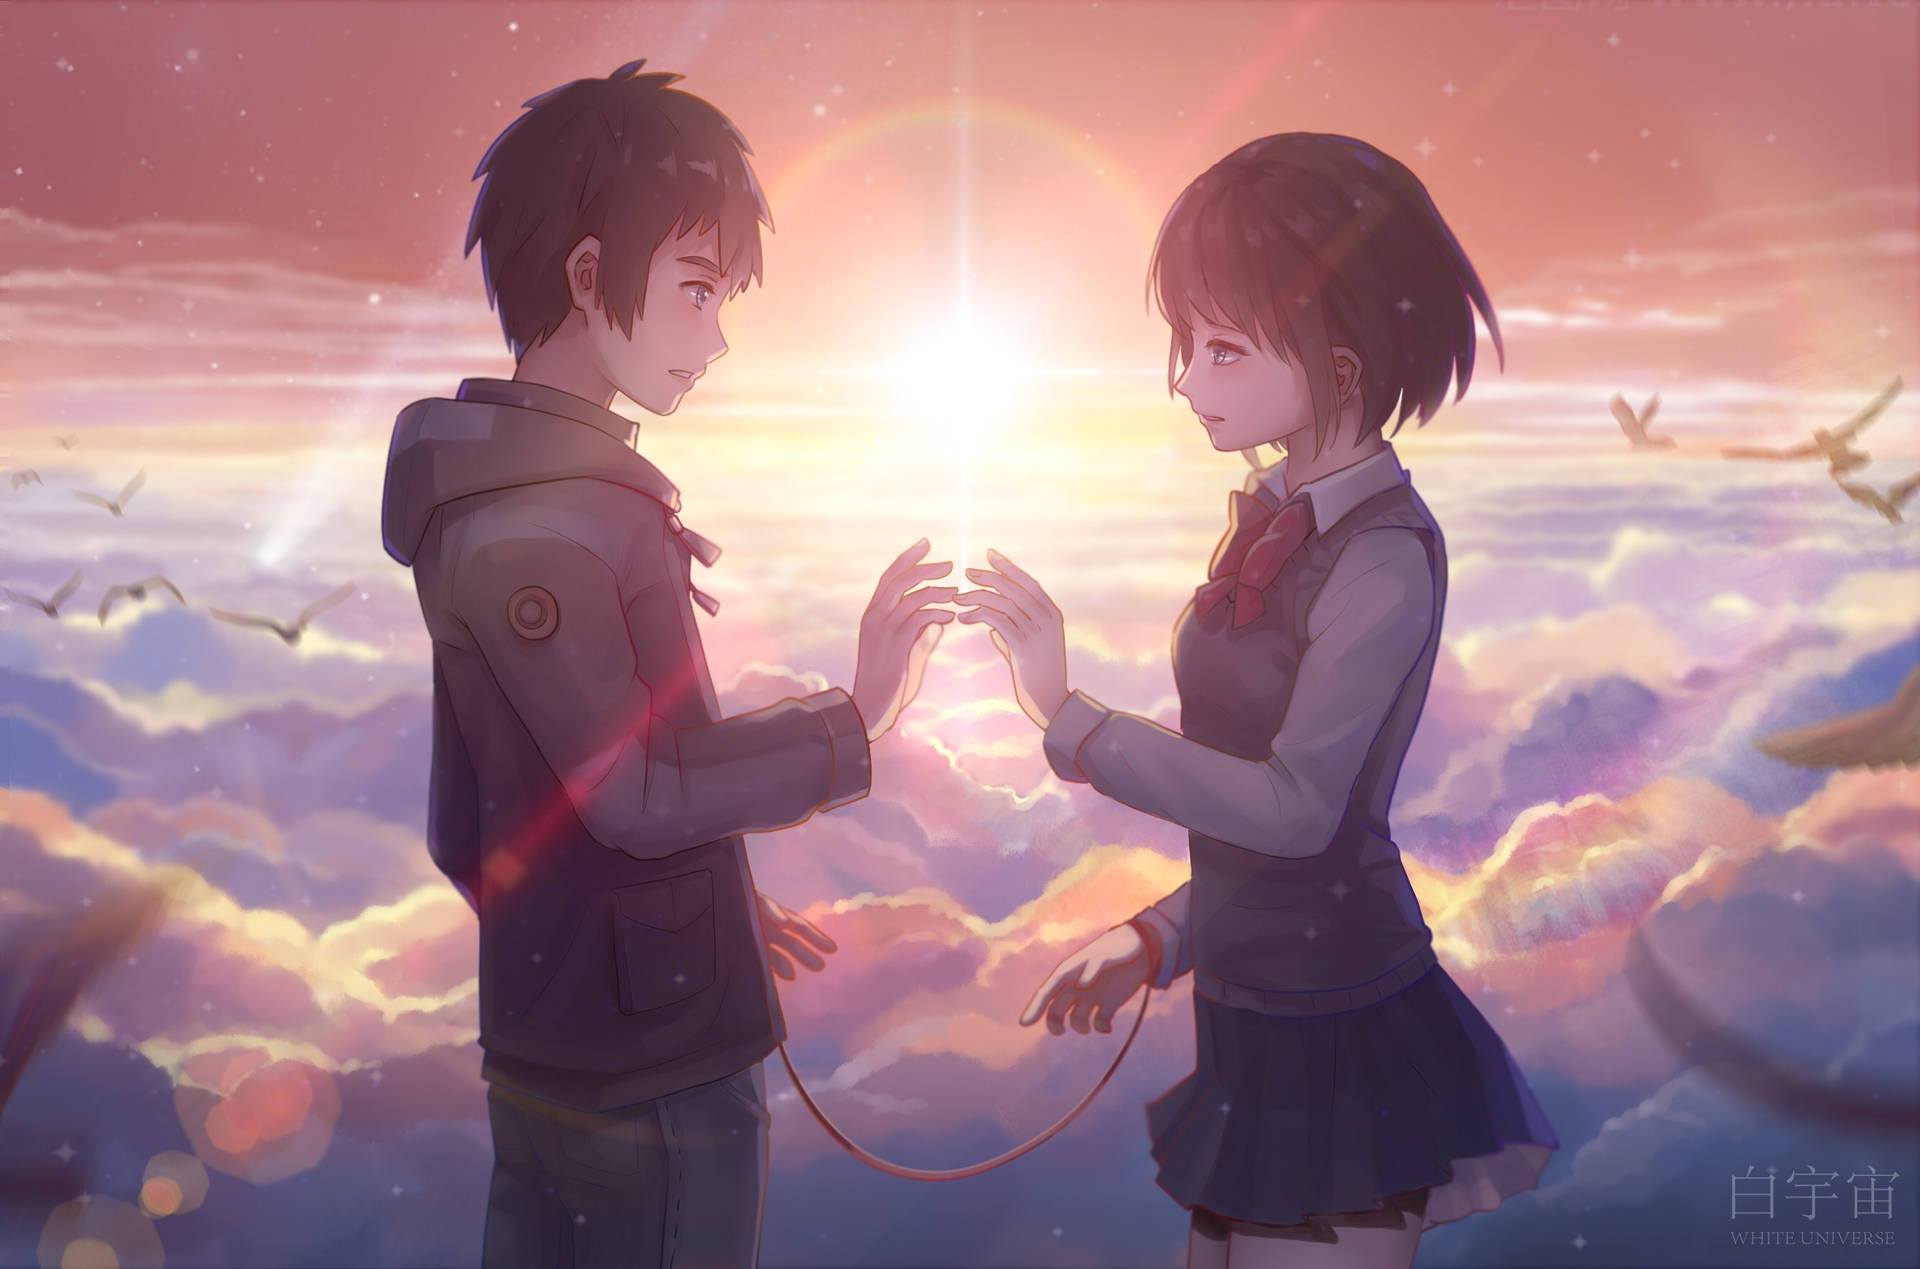 Your Name Anime 2016 Hands Touching